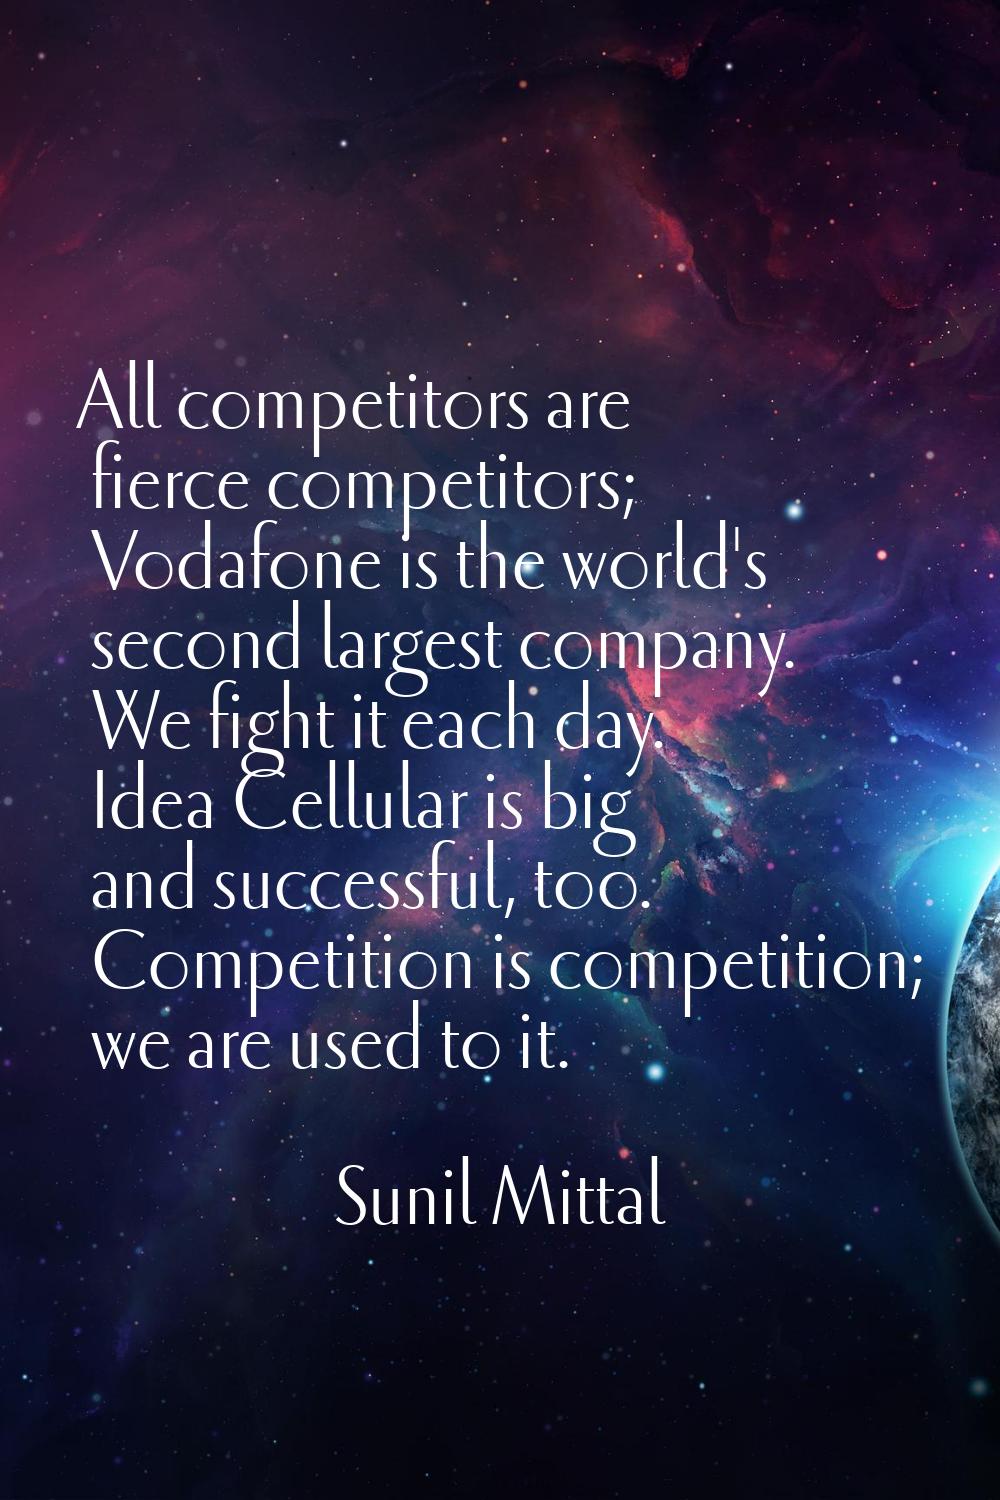 All competitors are fierce competitors; Vodafone is the world's second largest company. We fight it